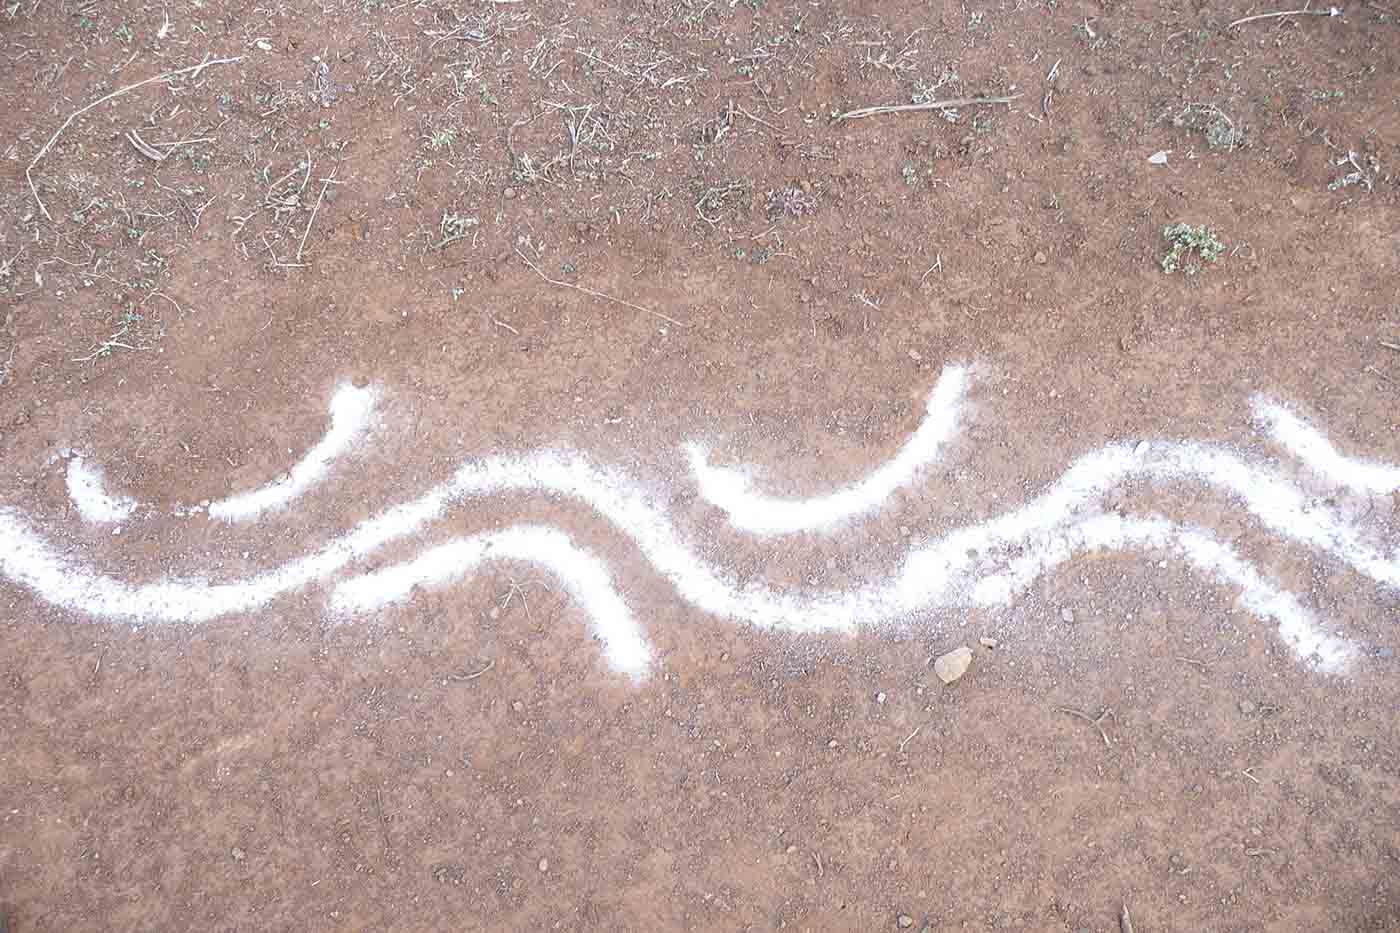 A series of white curved marks on the ground.